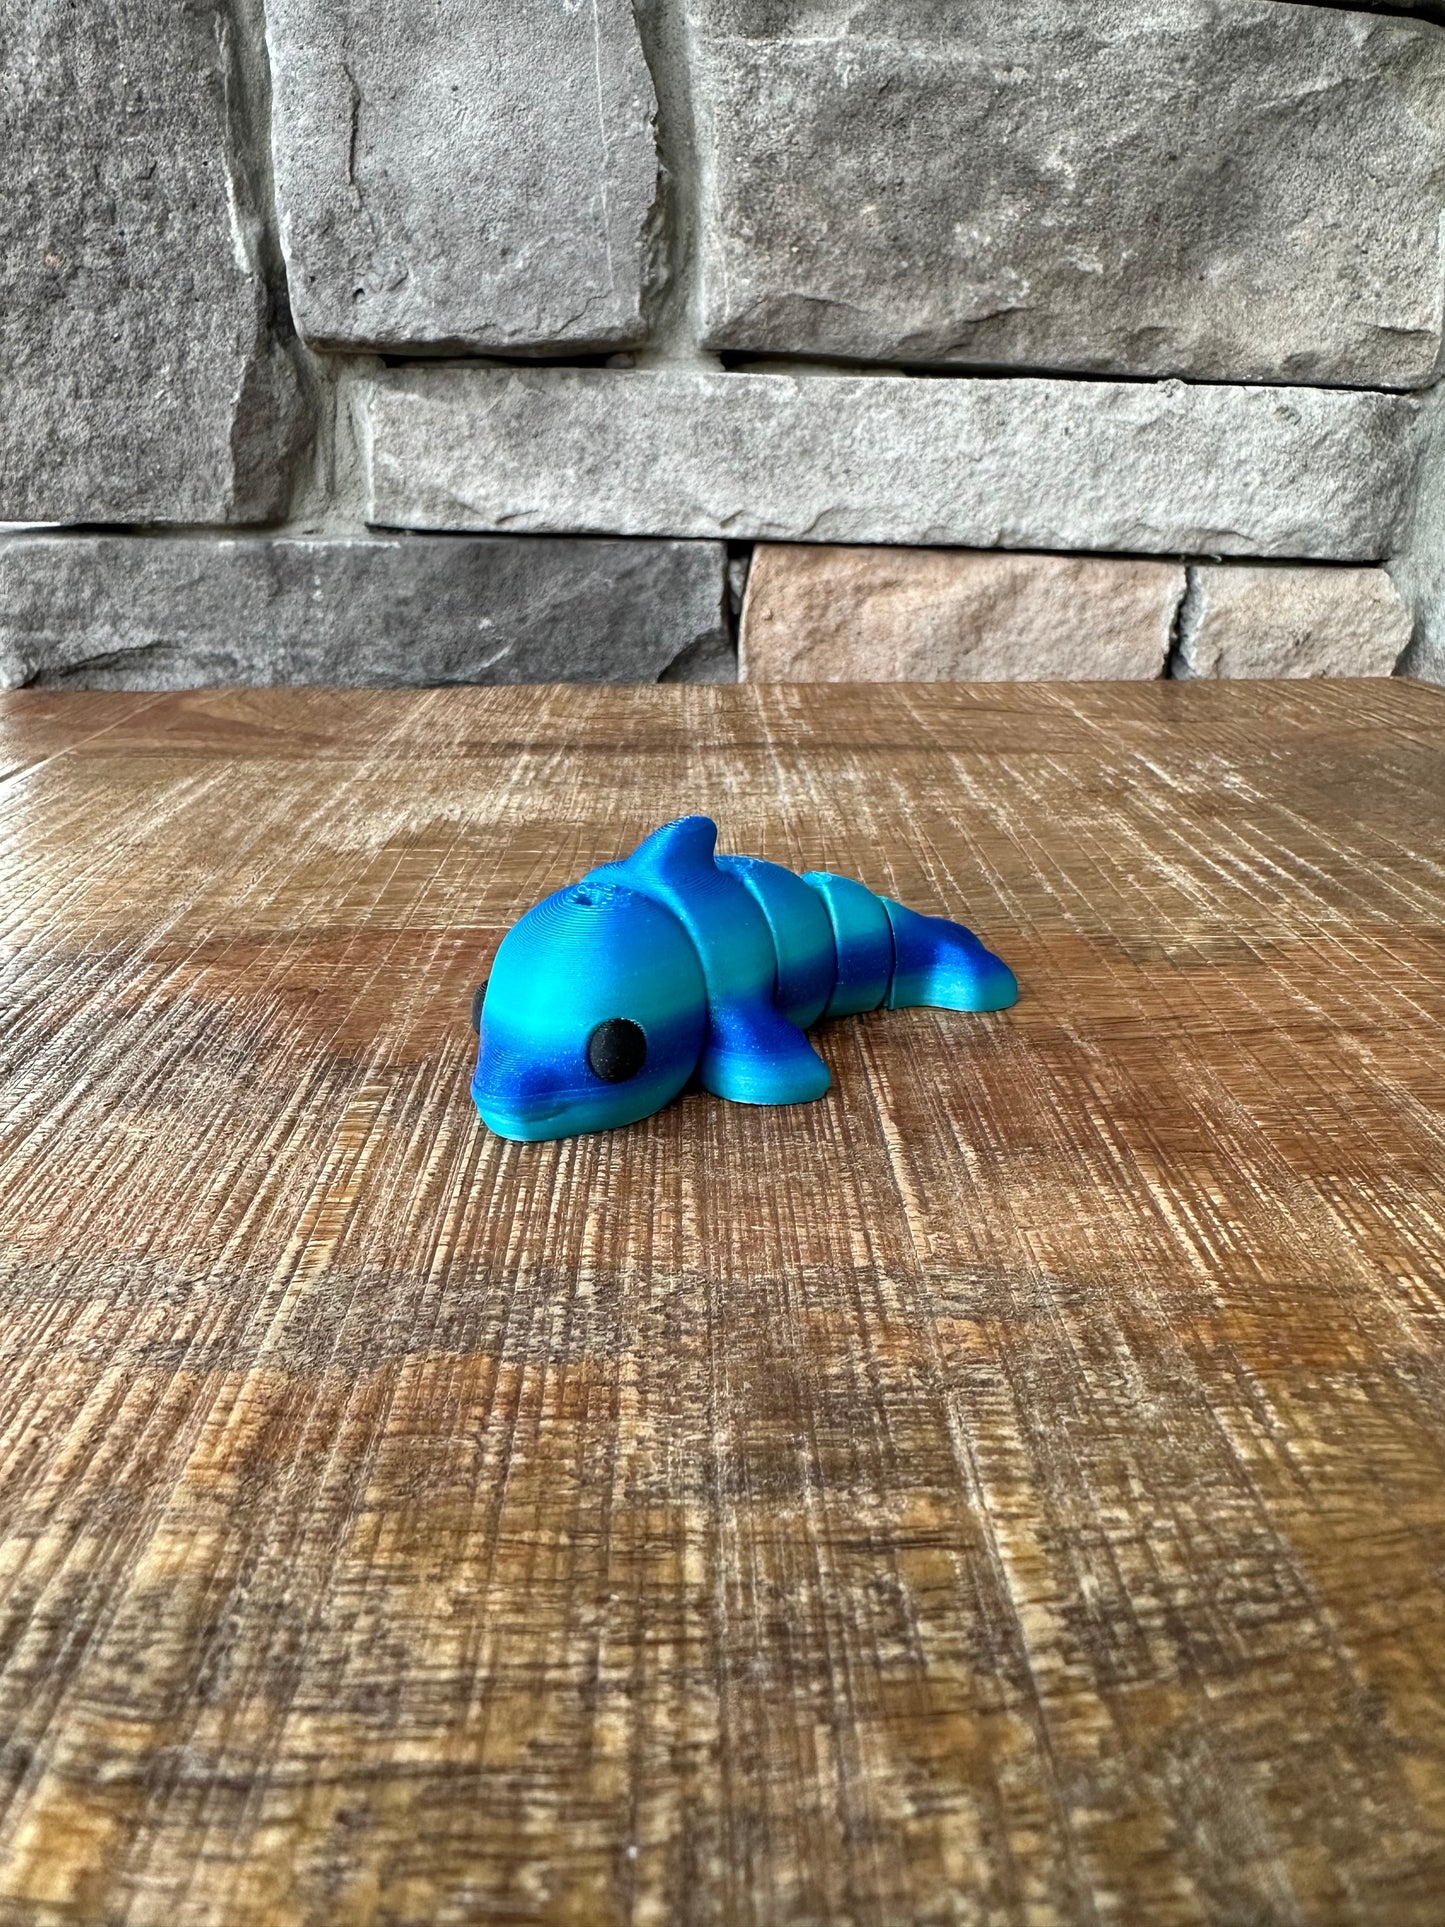 Tiny Dolphin | Tiny Collection | Multi Filament | 3D Printed | Articulated Flexible | Custom Fidget Toy